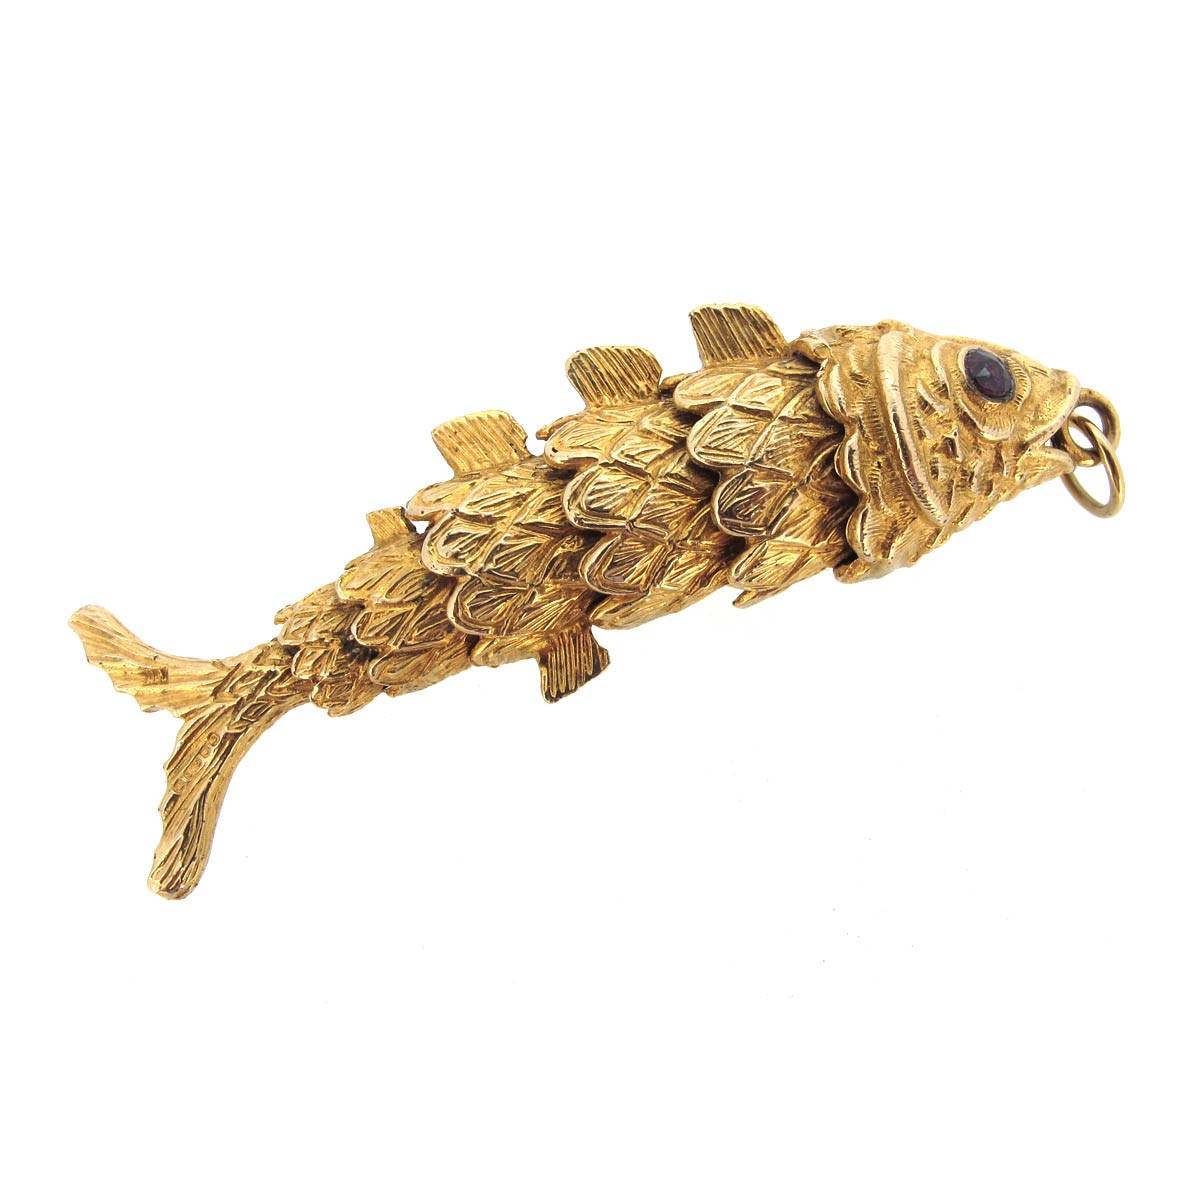 Vintage D'orlan Articulated Fish Necklace Gold Toned - Etsy